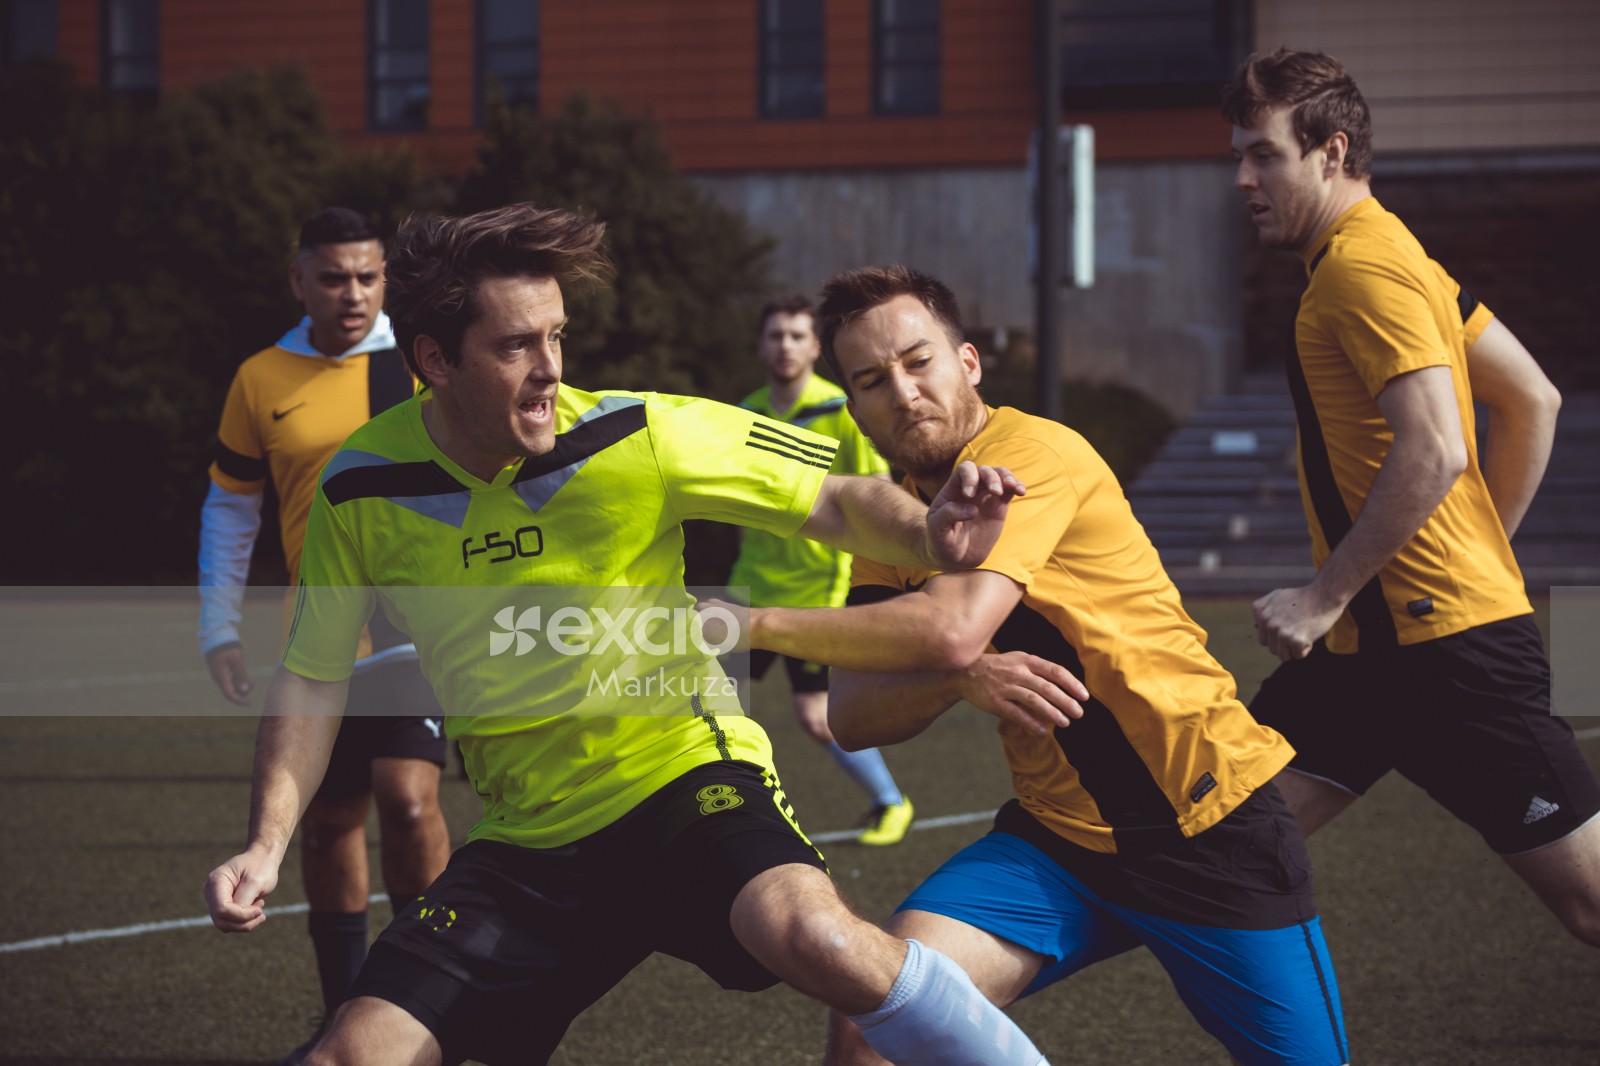 Two football players pushing eachother away - Sports Zone sunday league